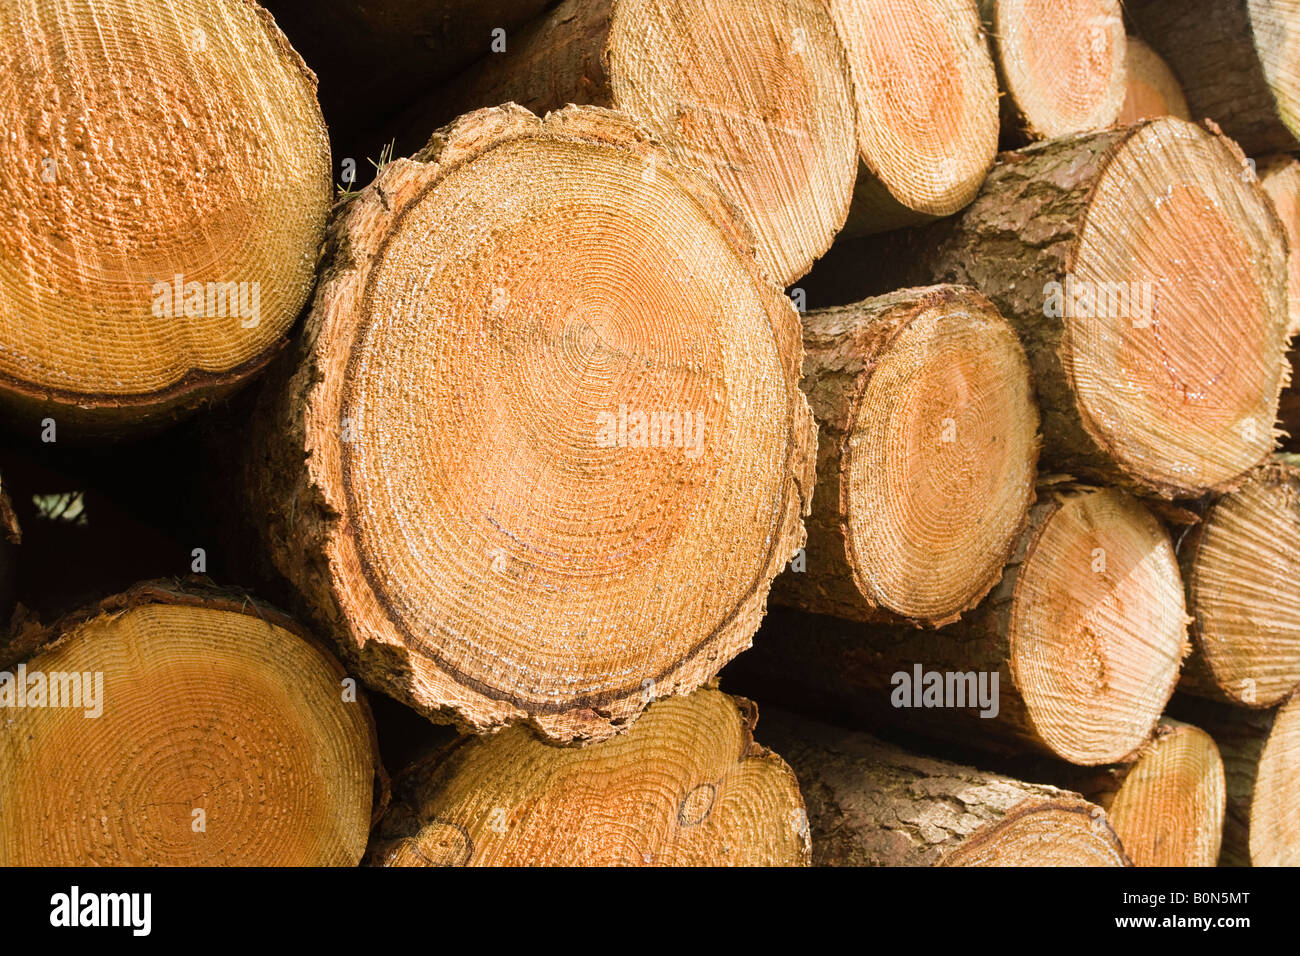 Stack of felled pine logs Stock Photo